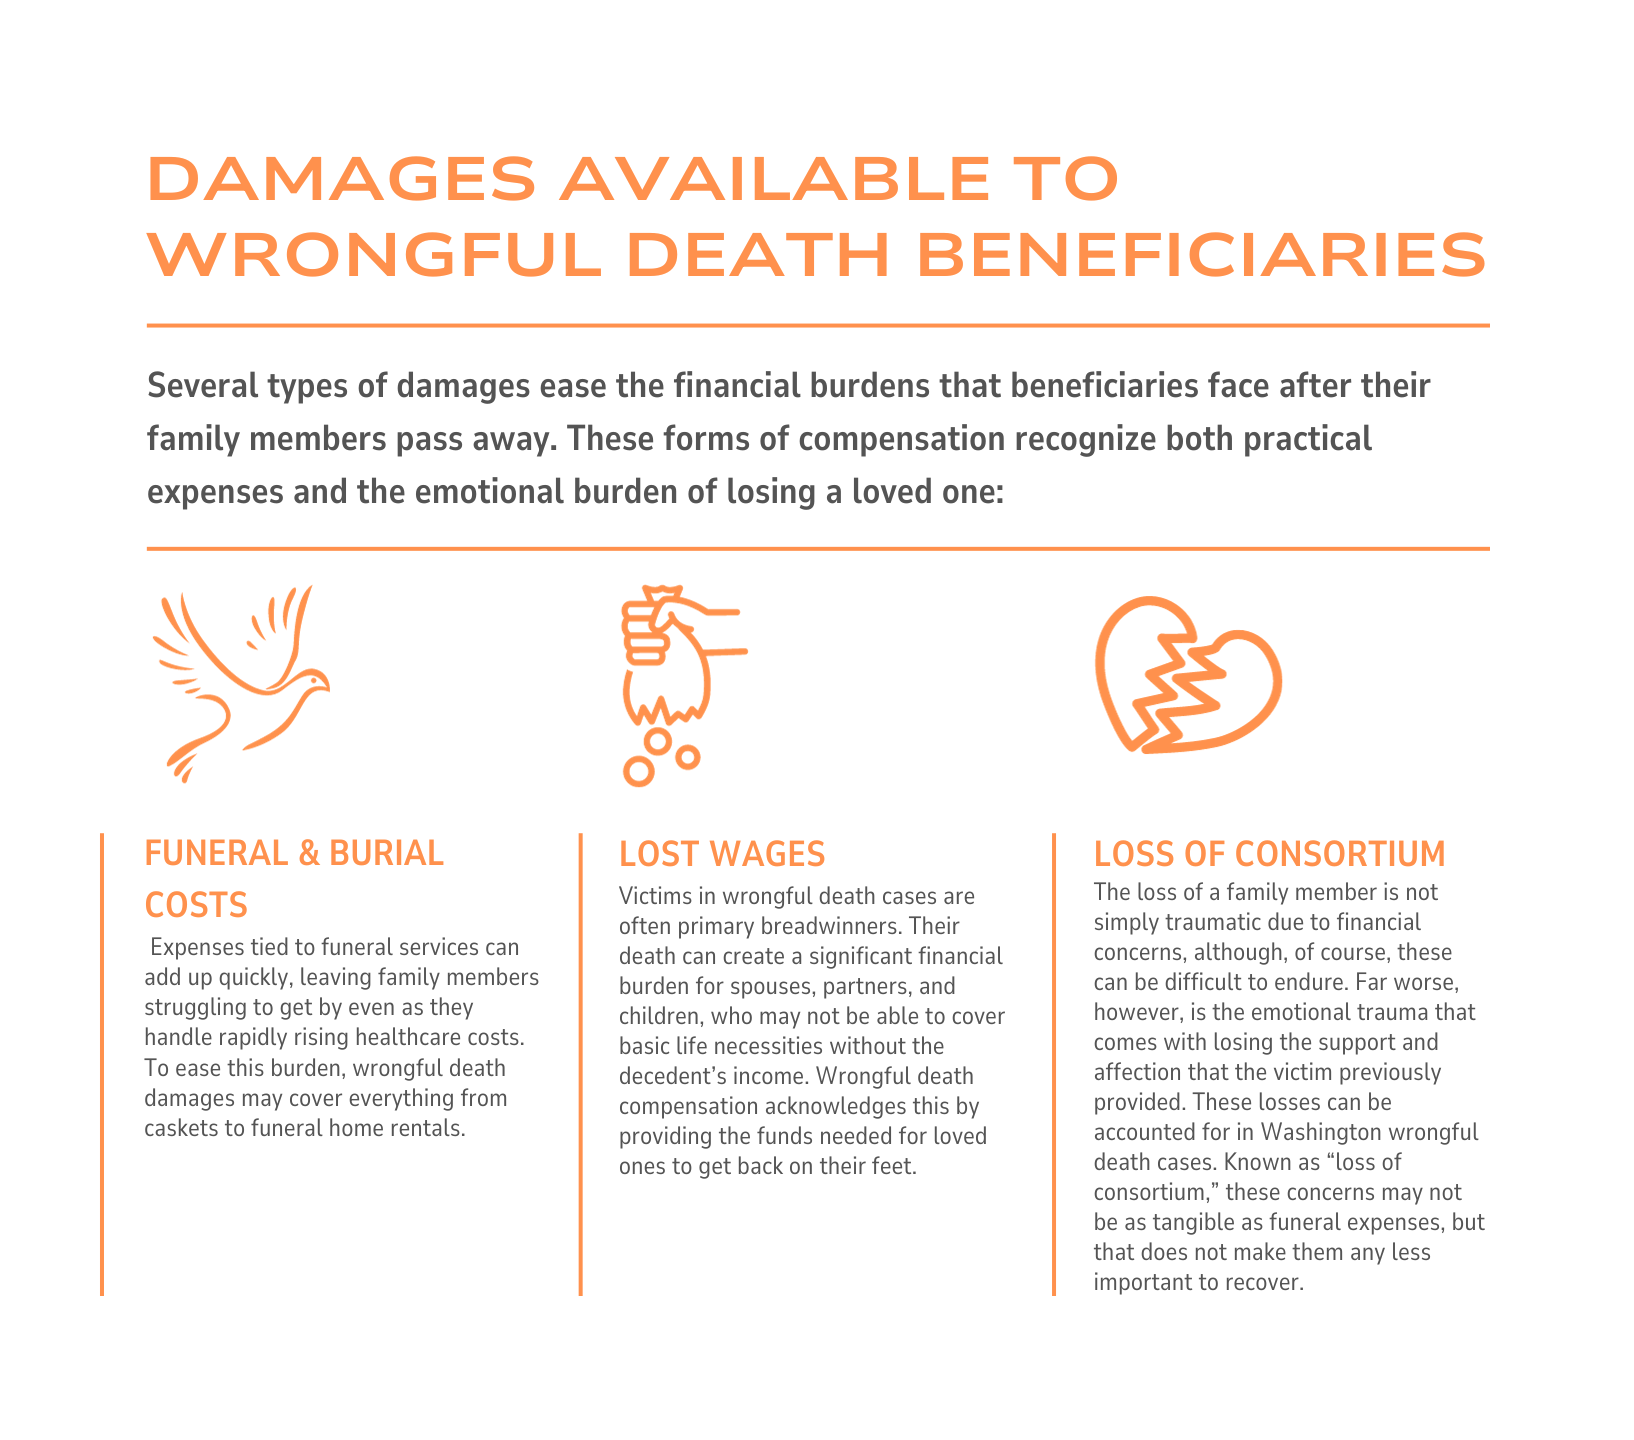 Damages Available to Wrongful Death Beneficiaries Infographic